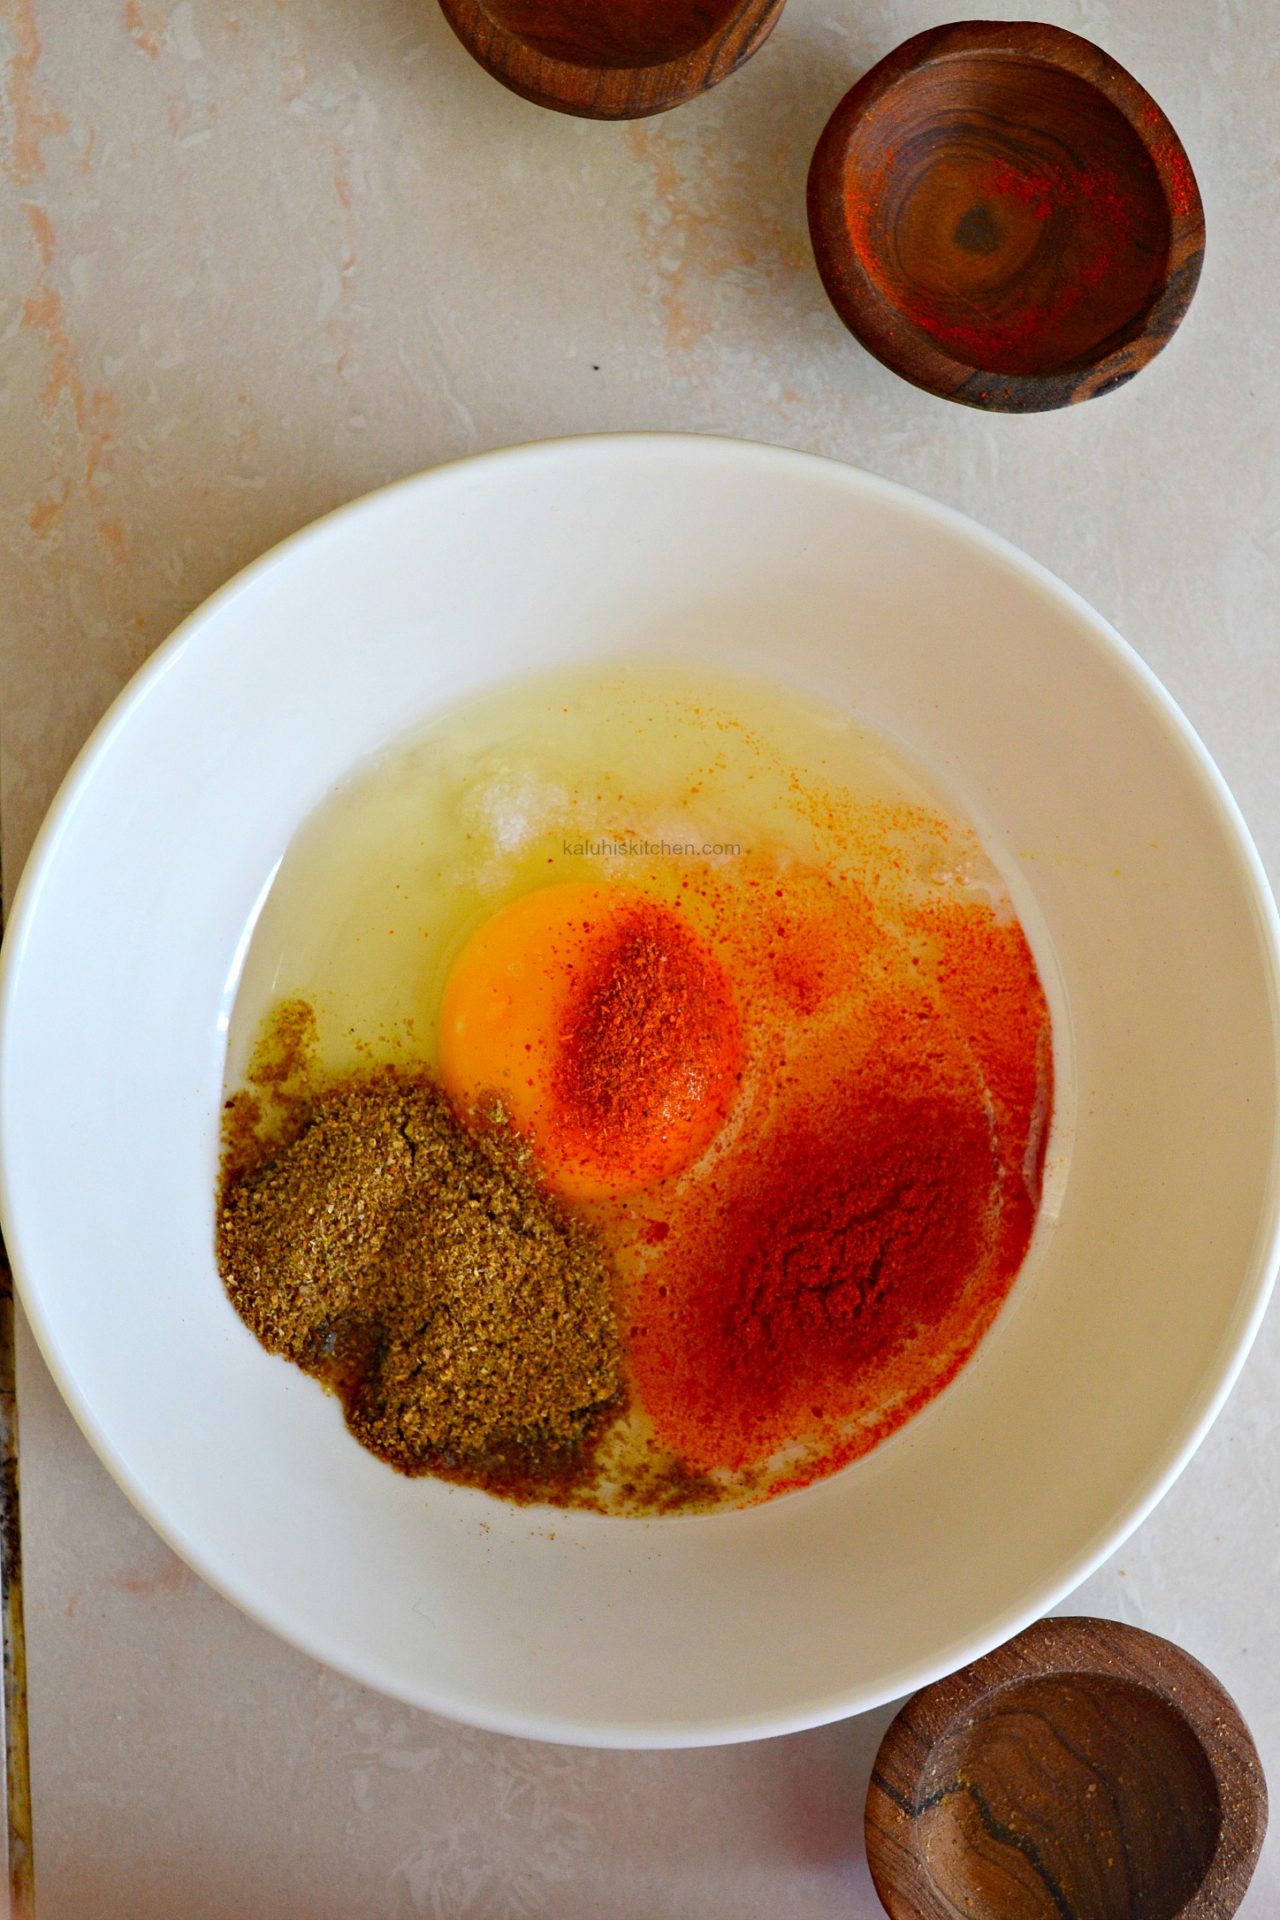 whisk the eggs with some cayenne, coriander powder and paprika and salt to add both flavor and aroma_kaluhiskitchne.com